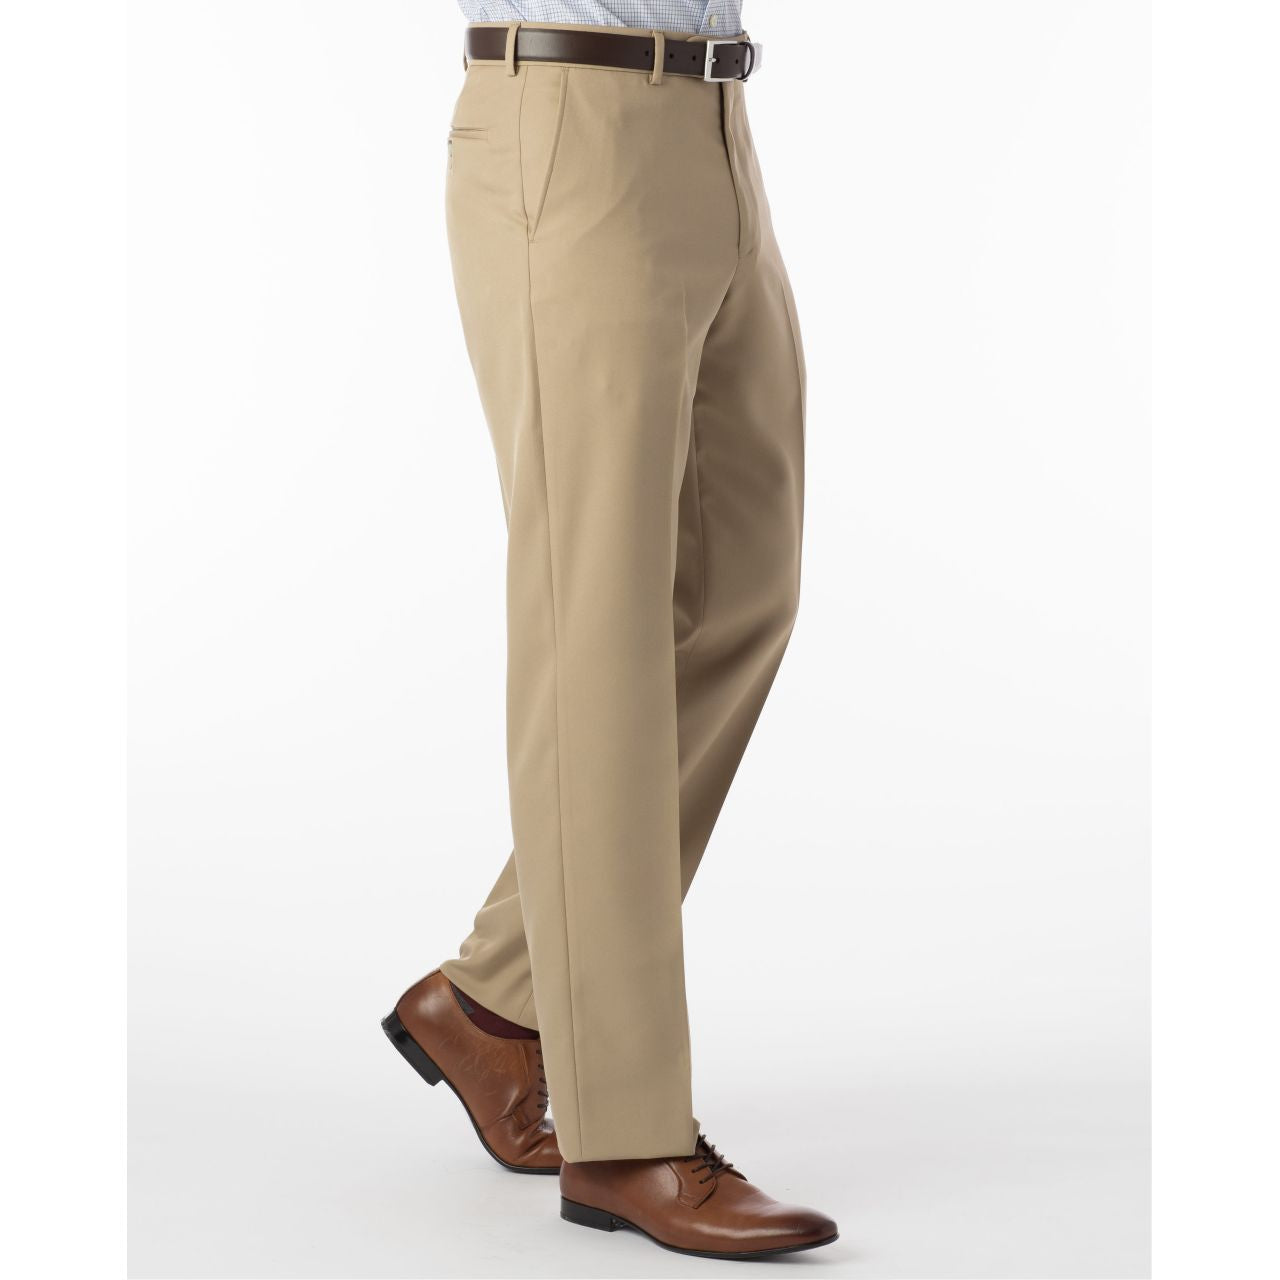 Comfort-EZE Micro Nano Performance Gabardine Trouser in Tan, Size 40 (Dunhill Traditional Fit) by Ballin